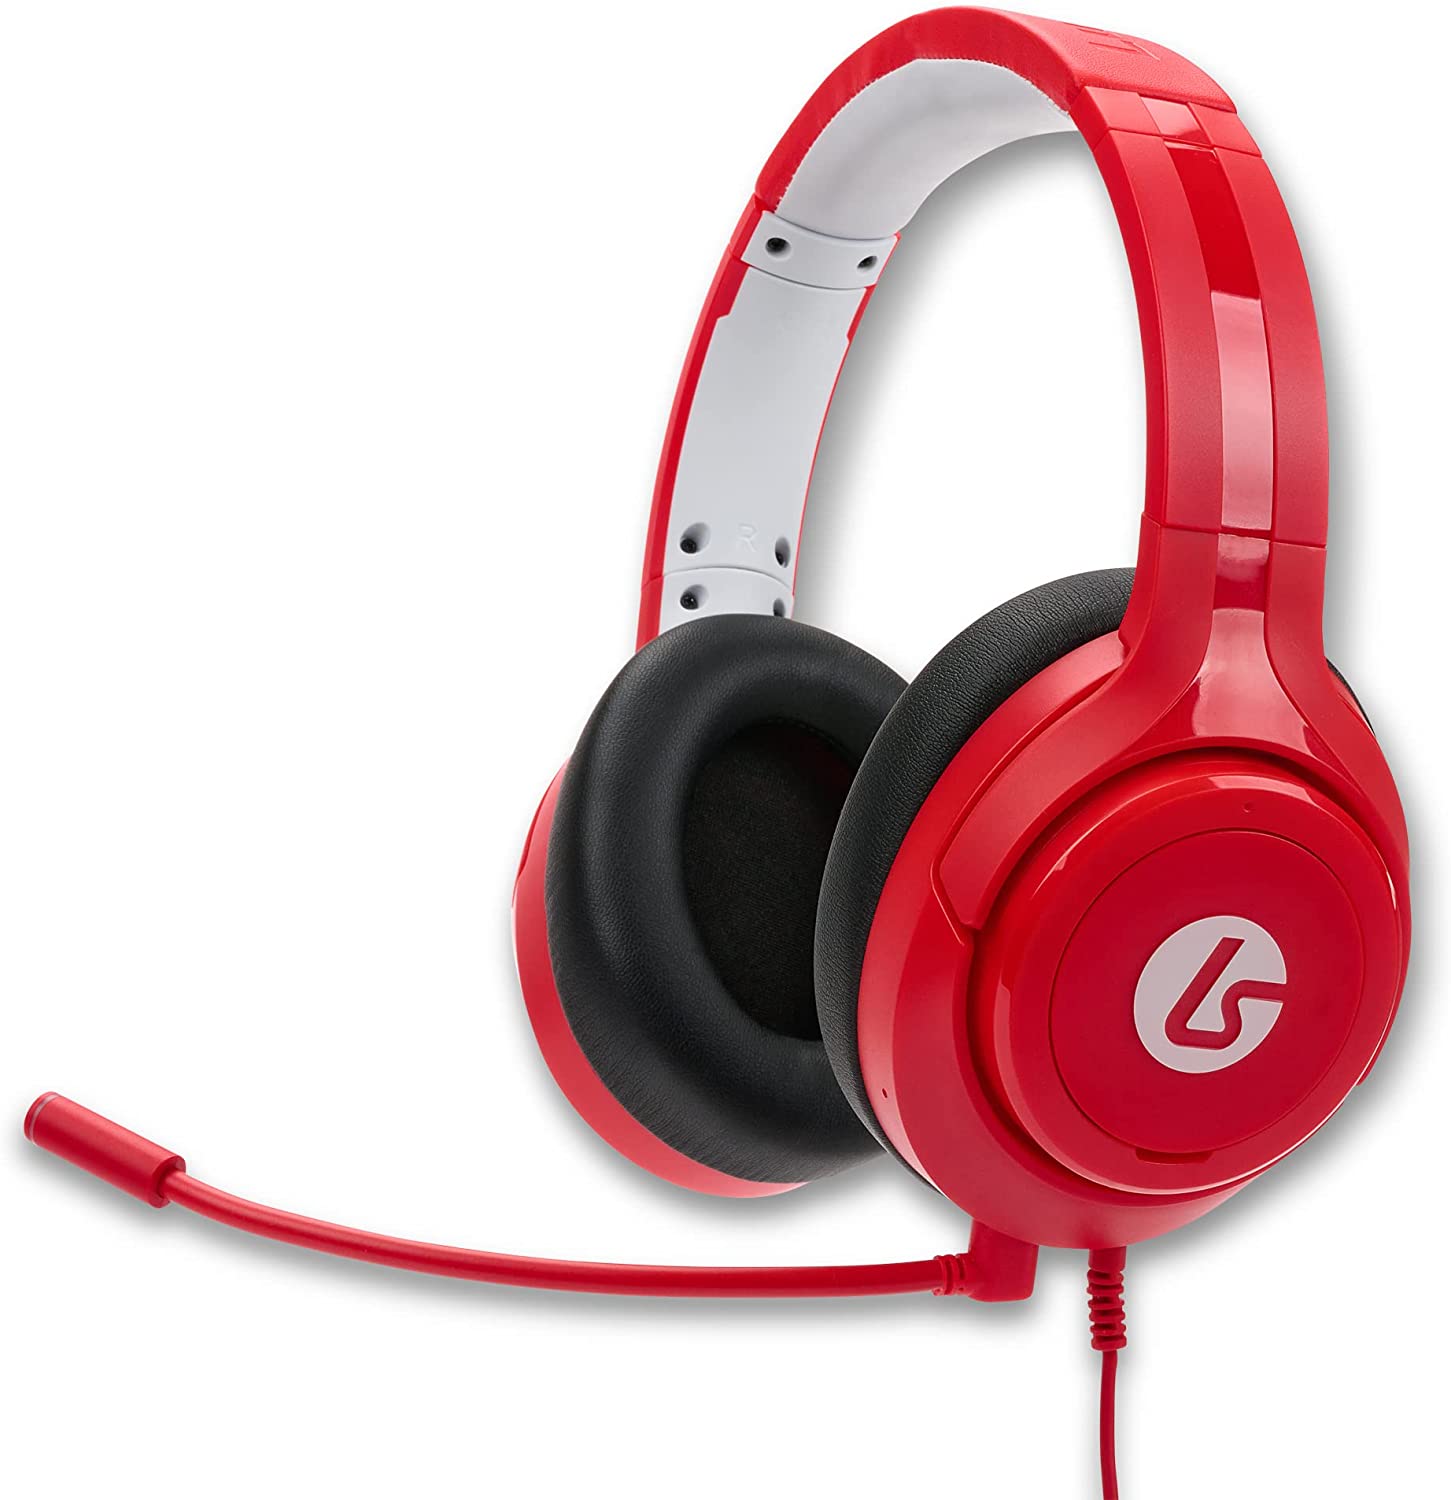 LucidSound LS10X Wired Gaming Headset for Xbox Series X & One (Red) $17.45 + Free Shipping w/ Prime or Orders $25+